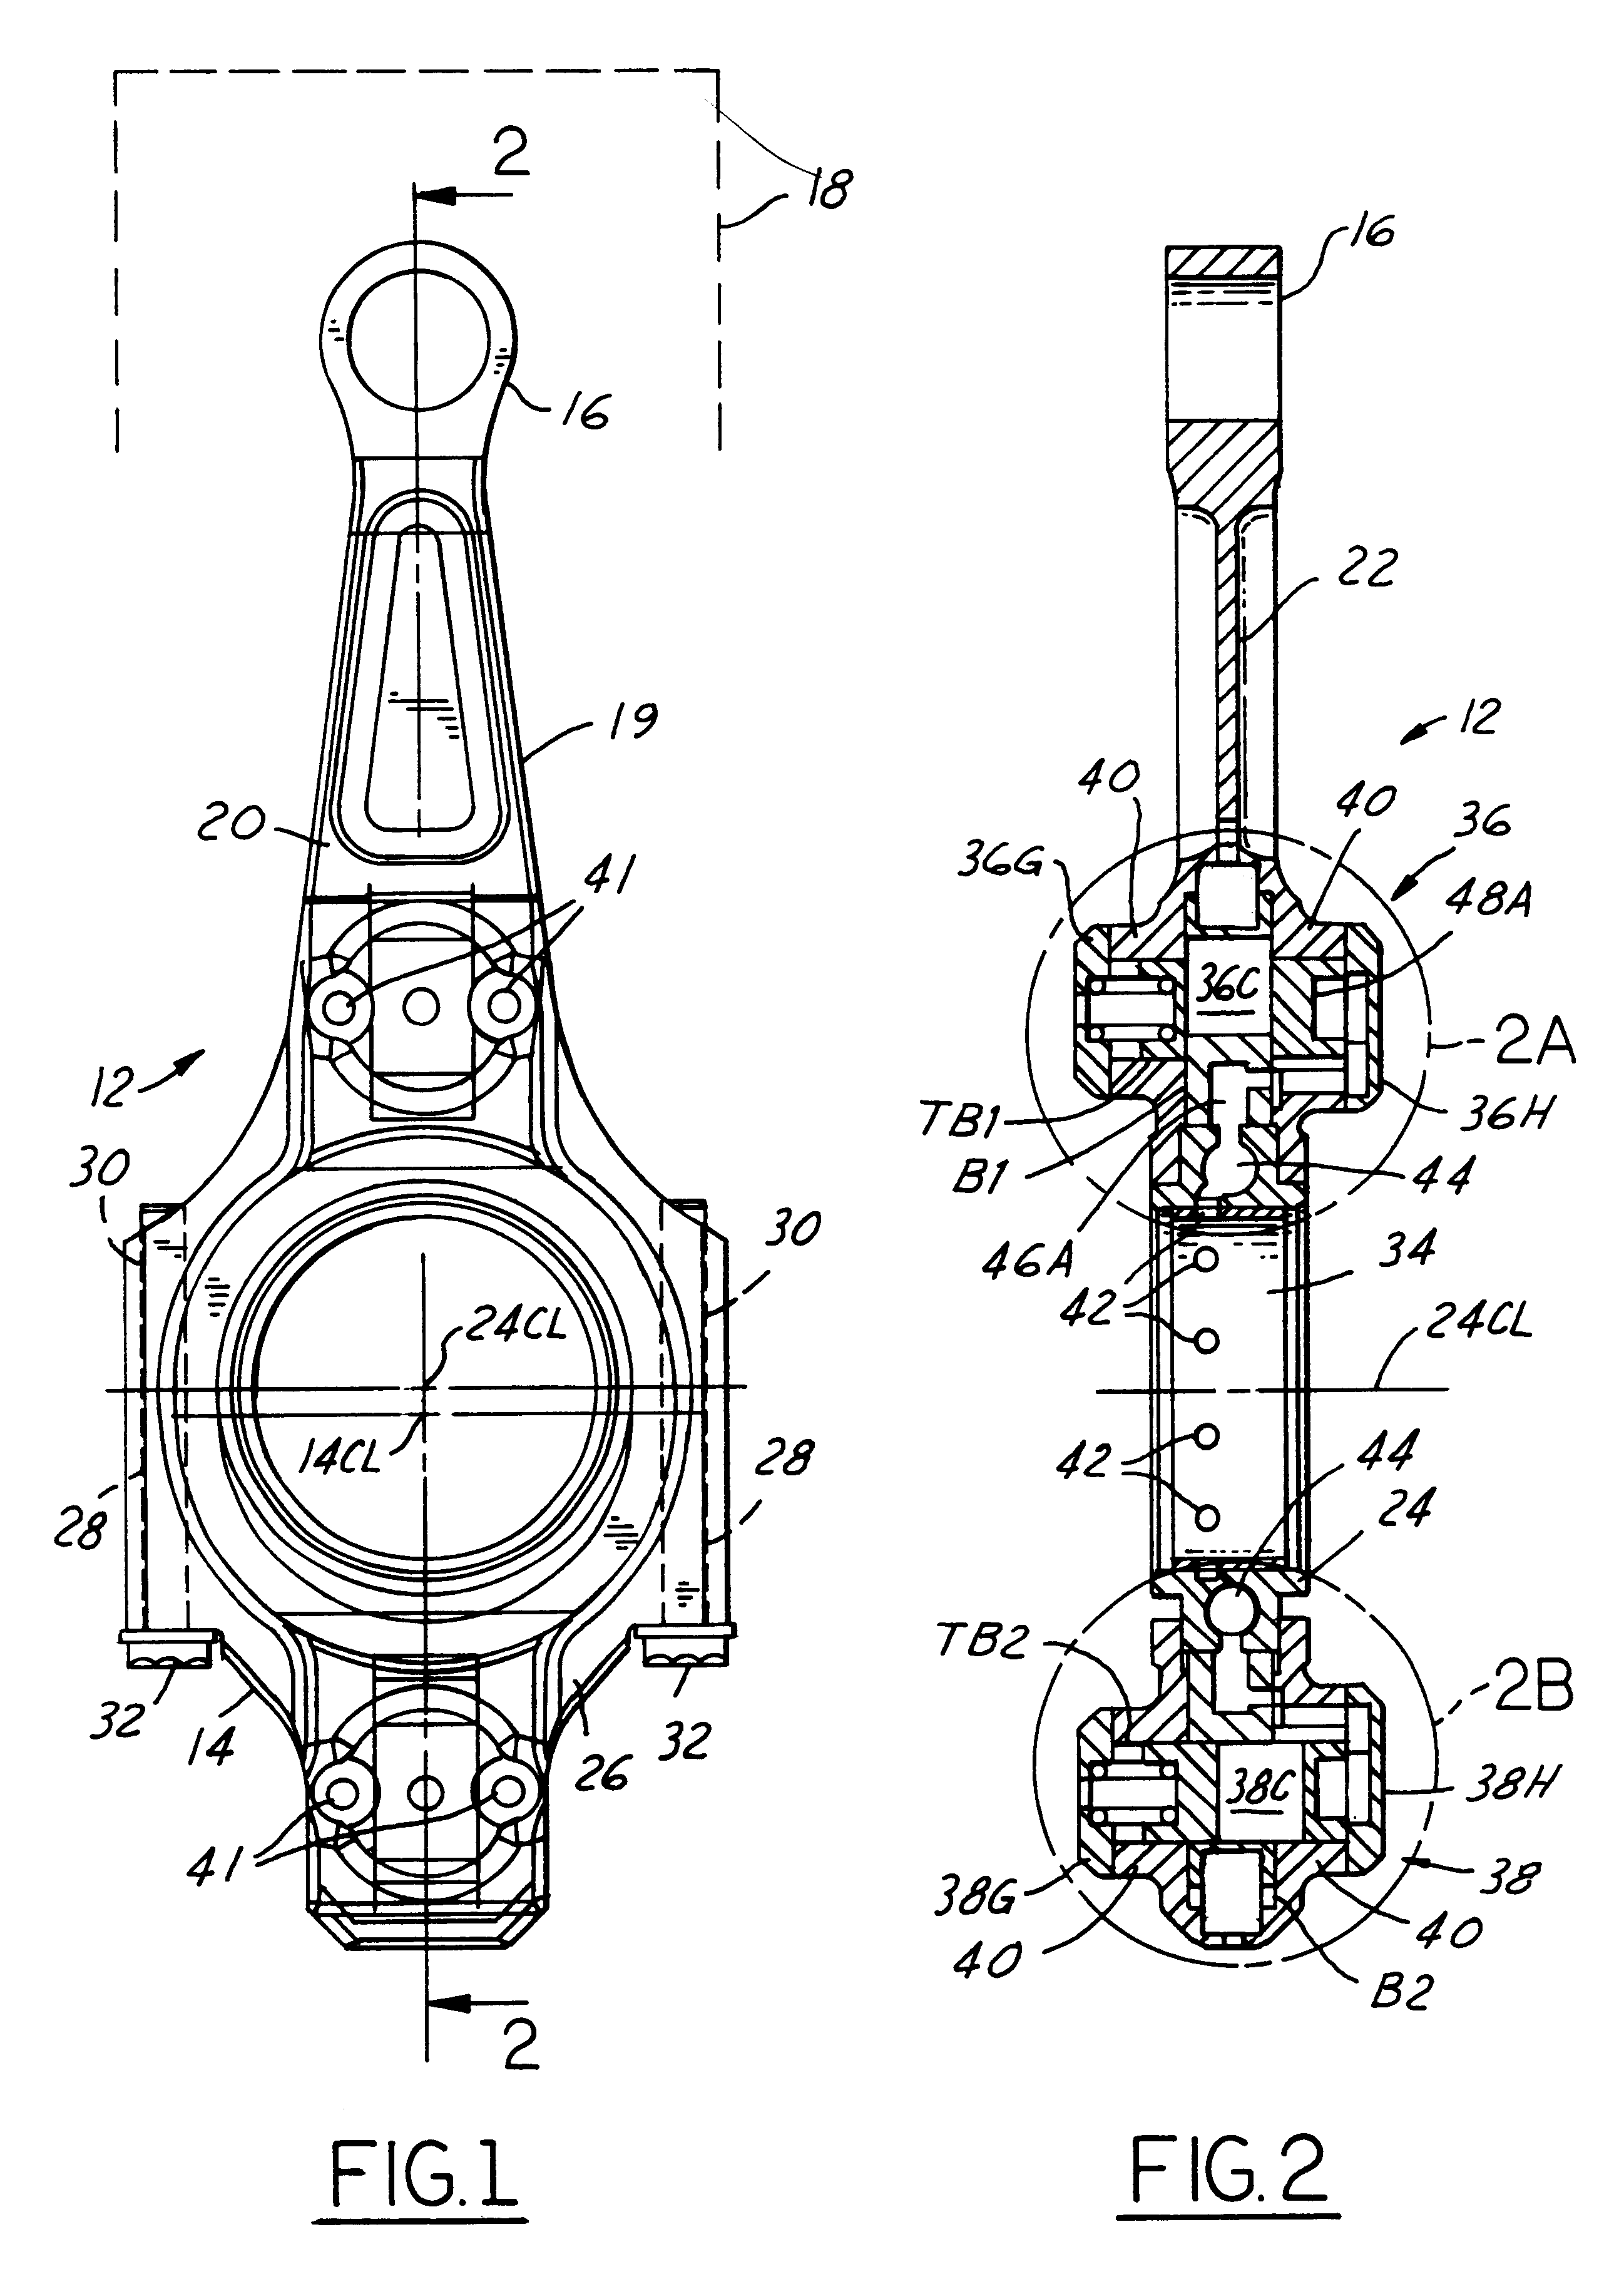 Hydraulic circuit for unlocking variable compression ratio connecting rod locking mechanisms